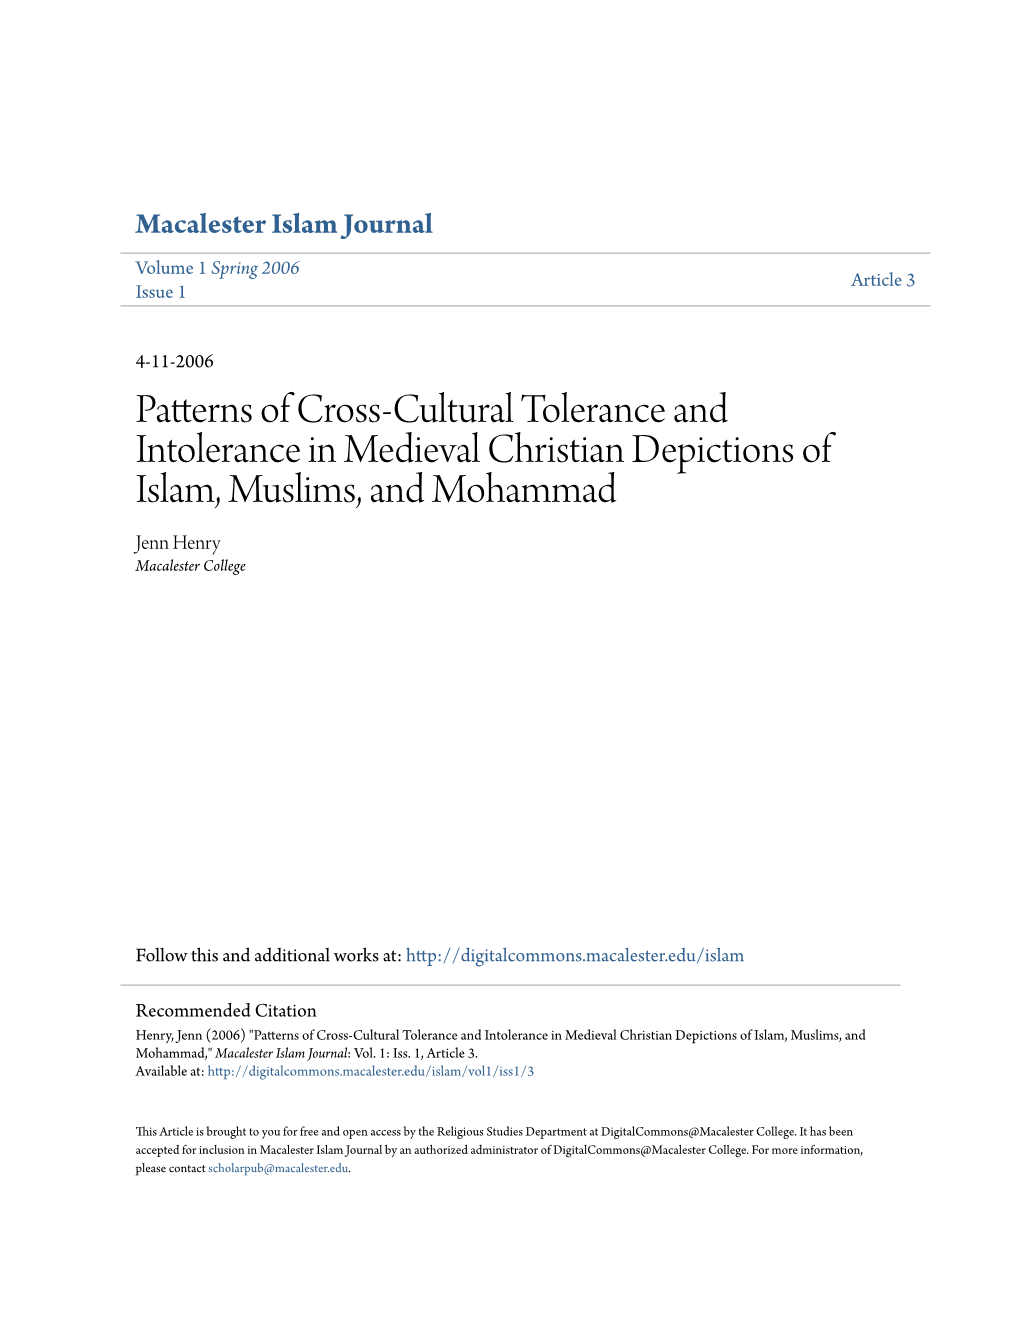 Patterns of Cross-Cultural Tolerance and Intolerance in Medieval Christian Depictions of Islam, Muslims, and Mohammad Jenn Henry Macalester College